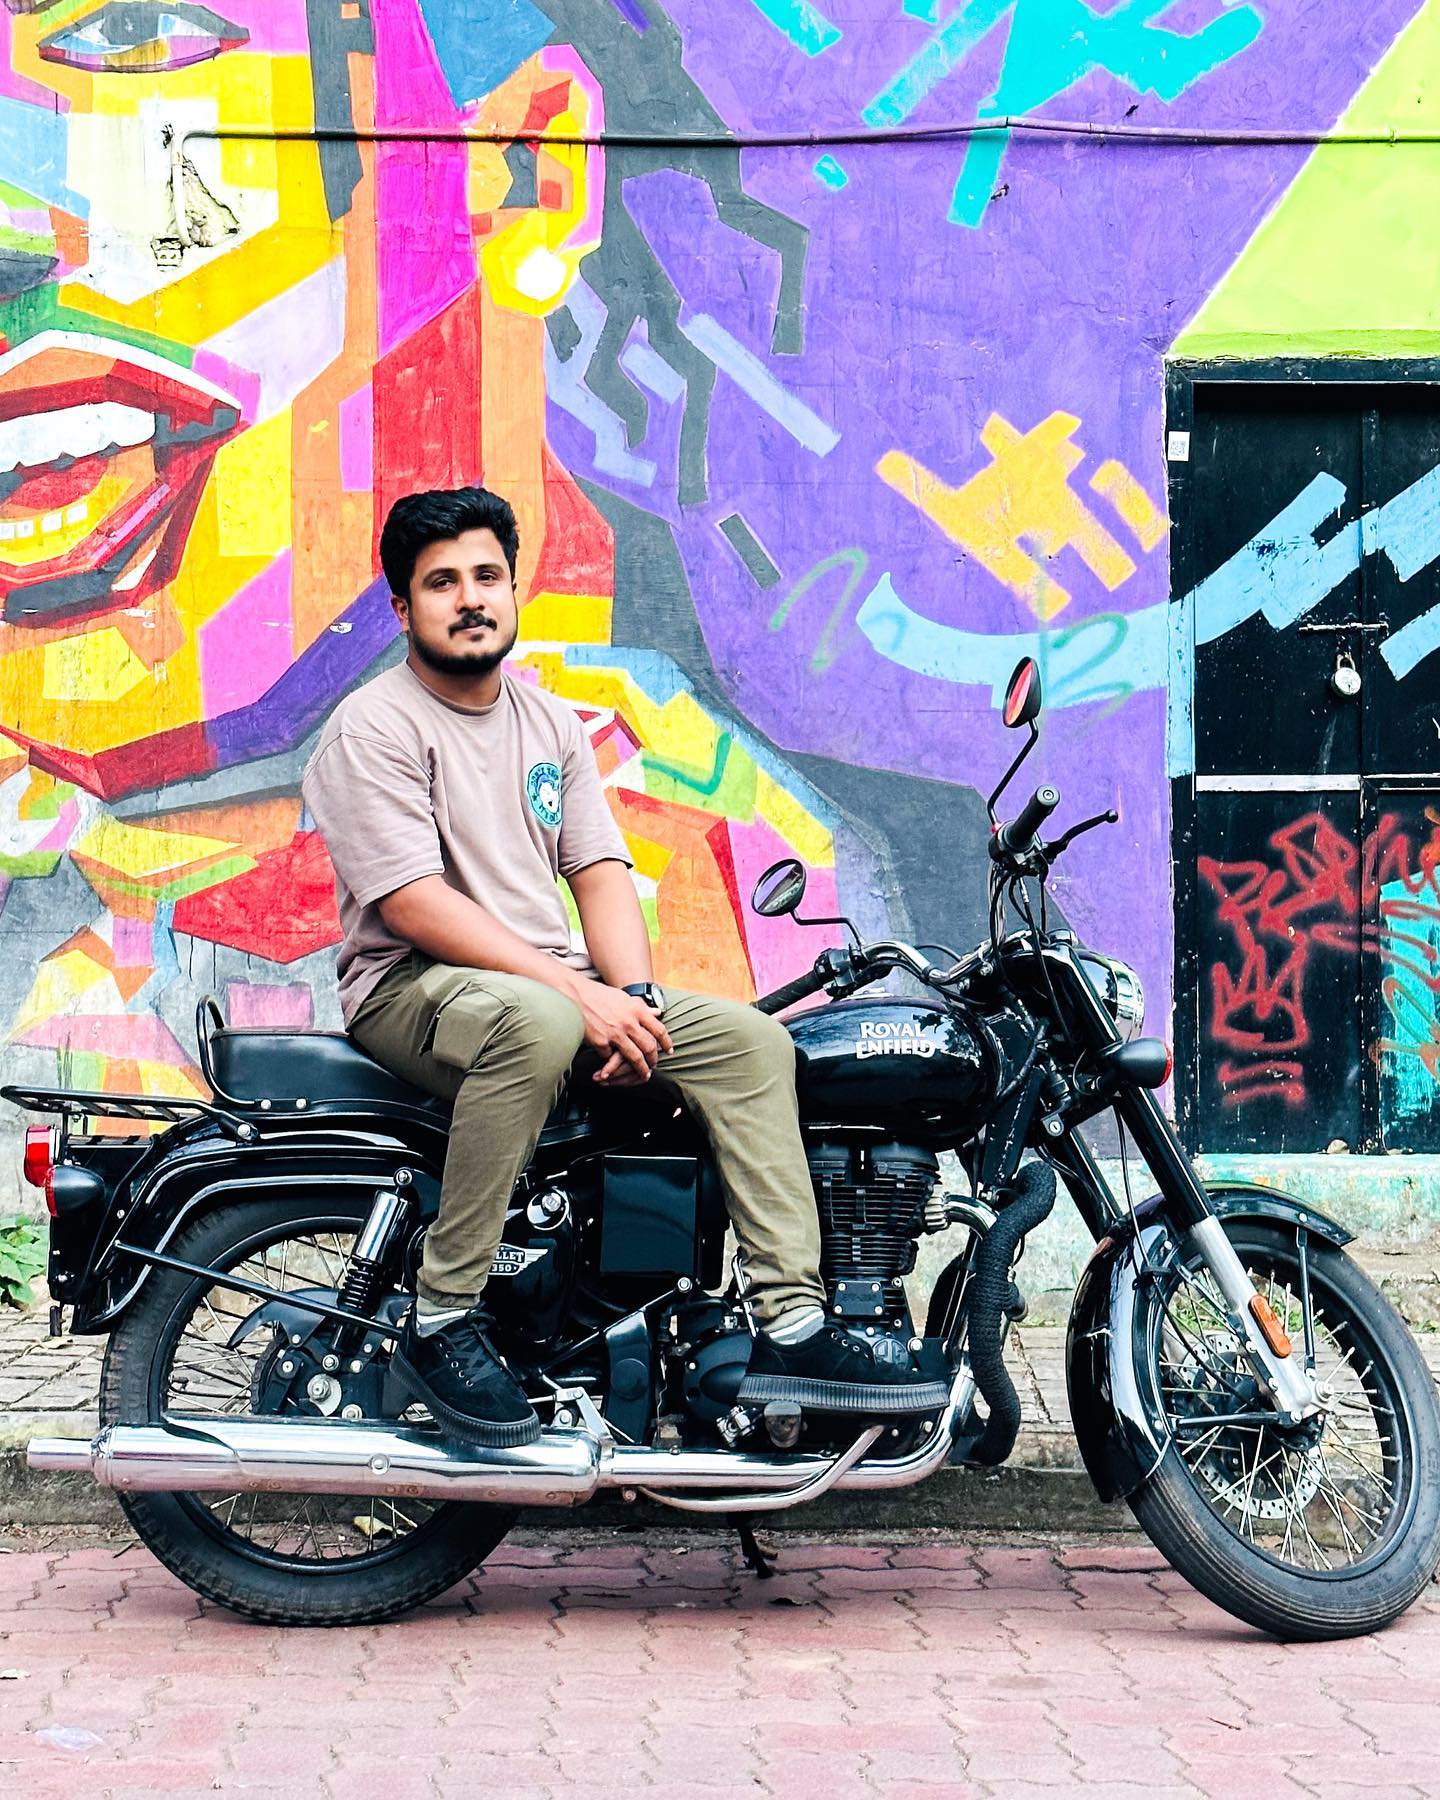 Ｎａｗａｂｚａａｄｅ - Only Royal people ride Enfield that's why it is “Royal Enfield”.  Click by - @iamvimal_official 😘😘😘 Pose by - @mr_sunny_307 🤩🤩🤩  Instagram - https://www.instagram.com/nawabzaade_official Tik Tok -  http://vm.tiktok.com/caKXy ...